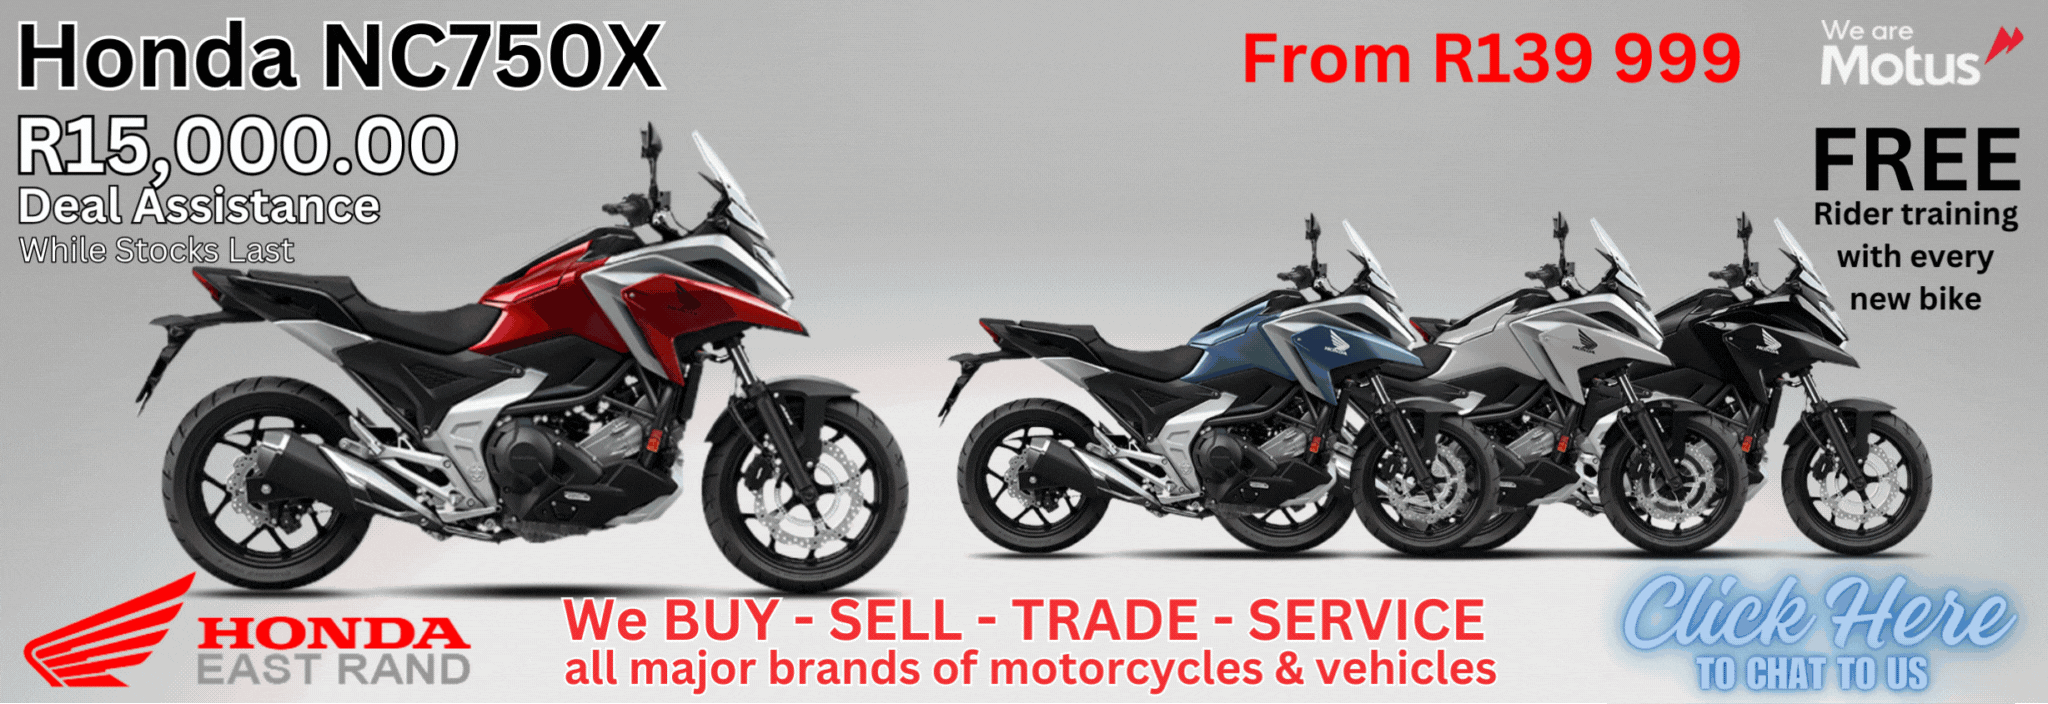 NEW USED MOTORCYCLES FOR SALE NEW HONDA MOTORCYCLES SALES PARTS SERVICE FINANCE HONDA VEHICLES FOR SALE NEW USED